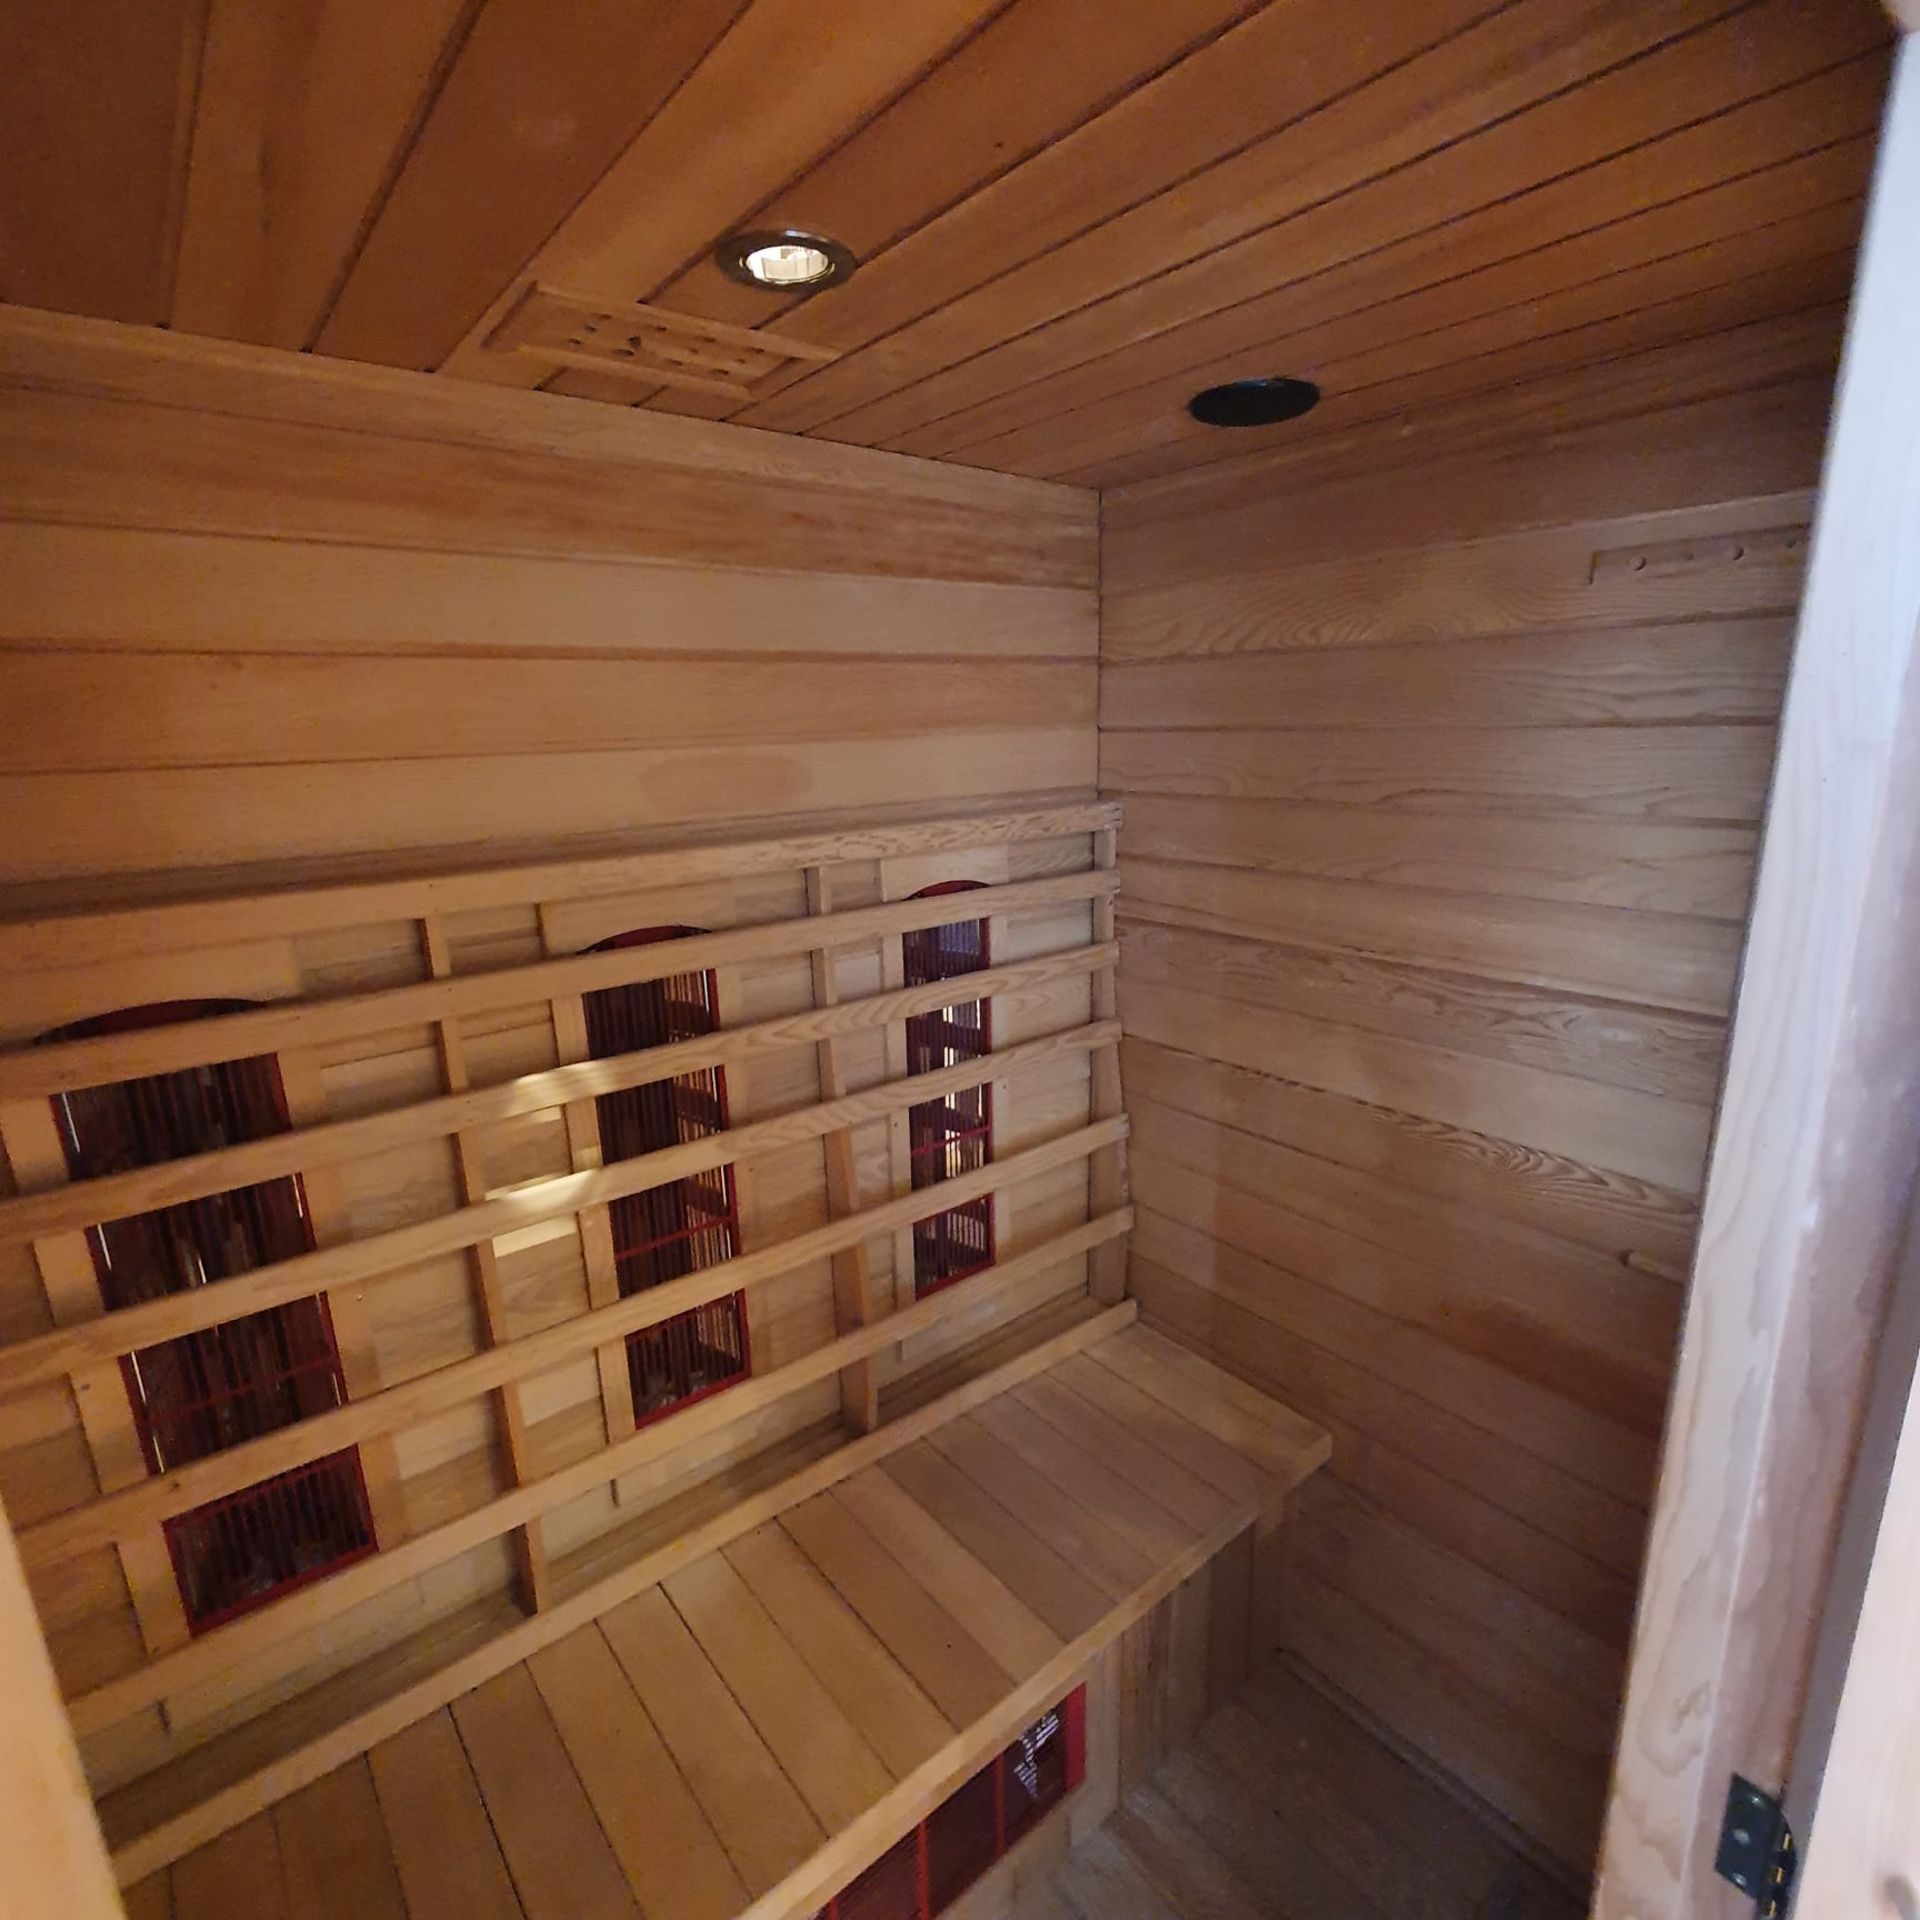 Infrared Sauna Room with Music System. Approx 1550mm Width, 1100mm Deep, 1900mm High. - Image 4 of 10